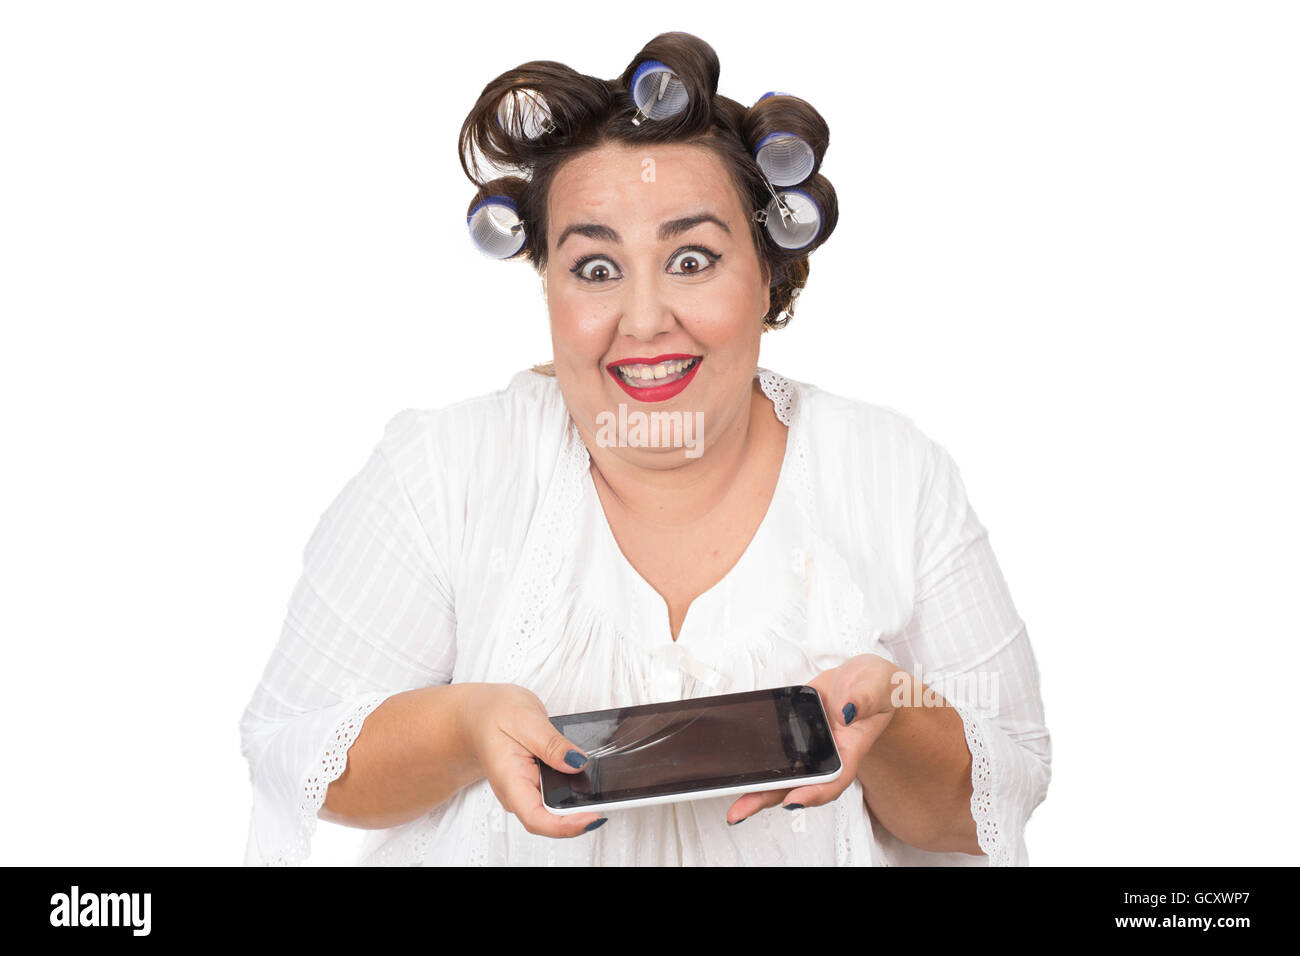 overweight woman housewife holds broken tablet in hands Stock Photo